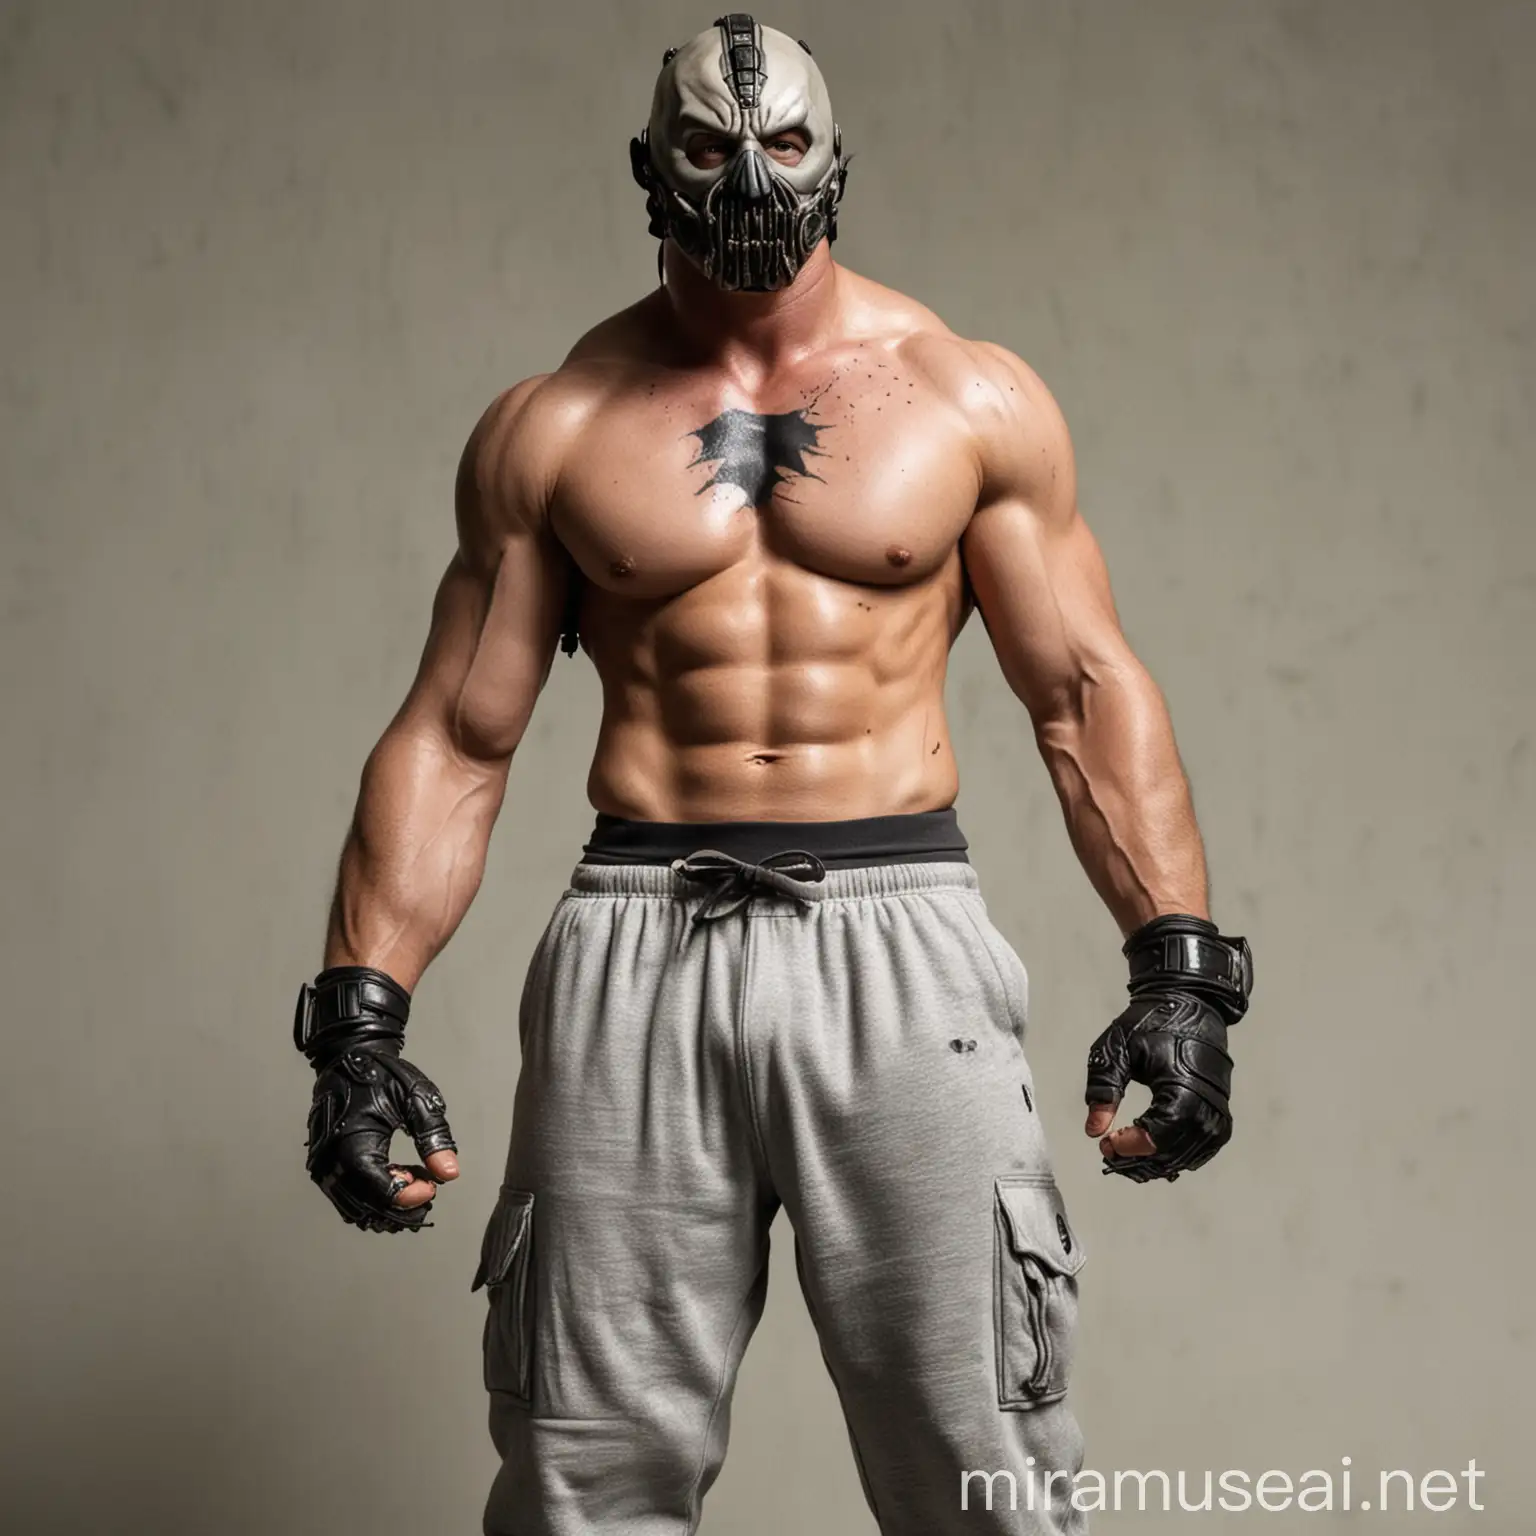 Bane with Mask and Scars Shirtless in Grey Sweatpants and Jordans